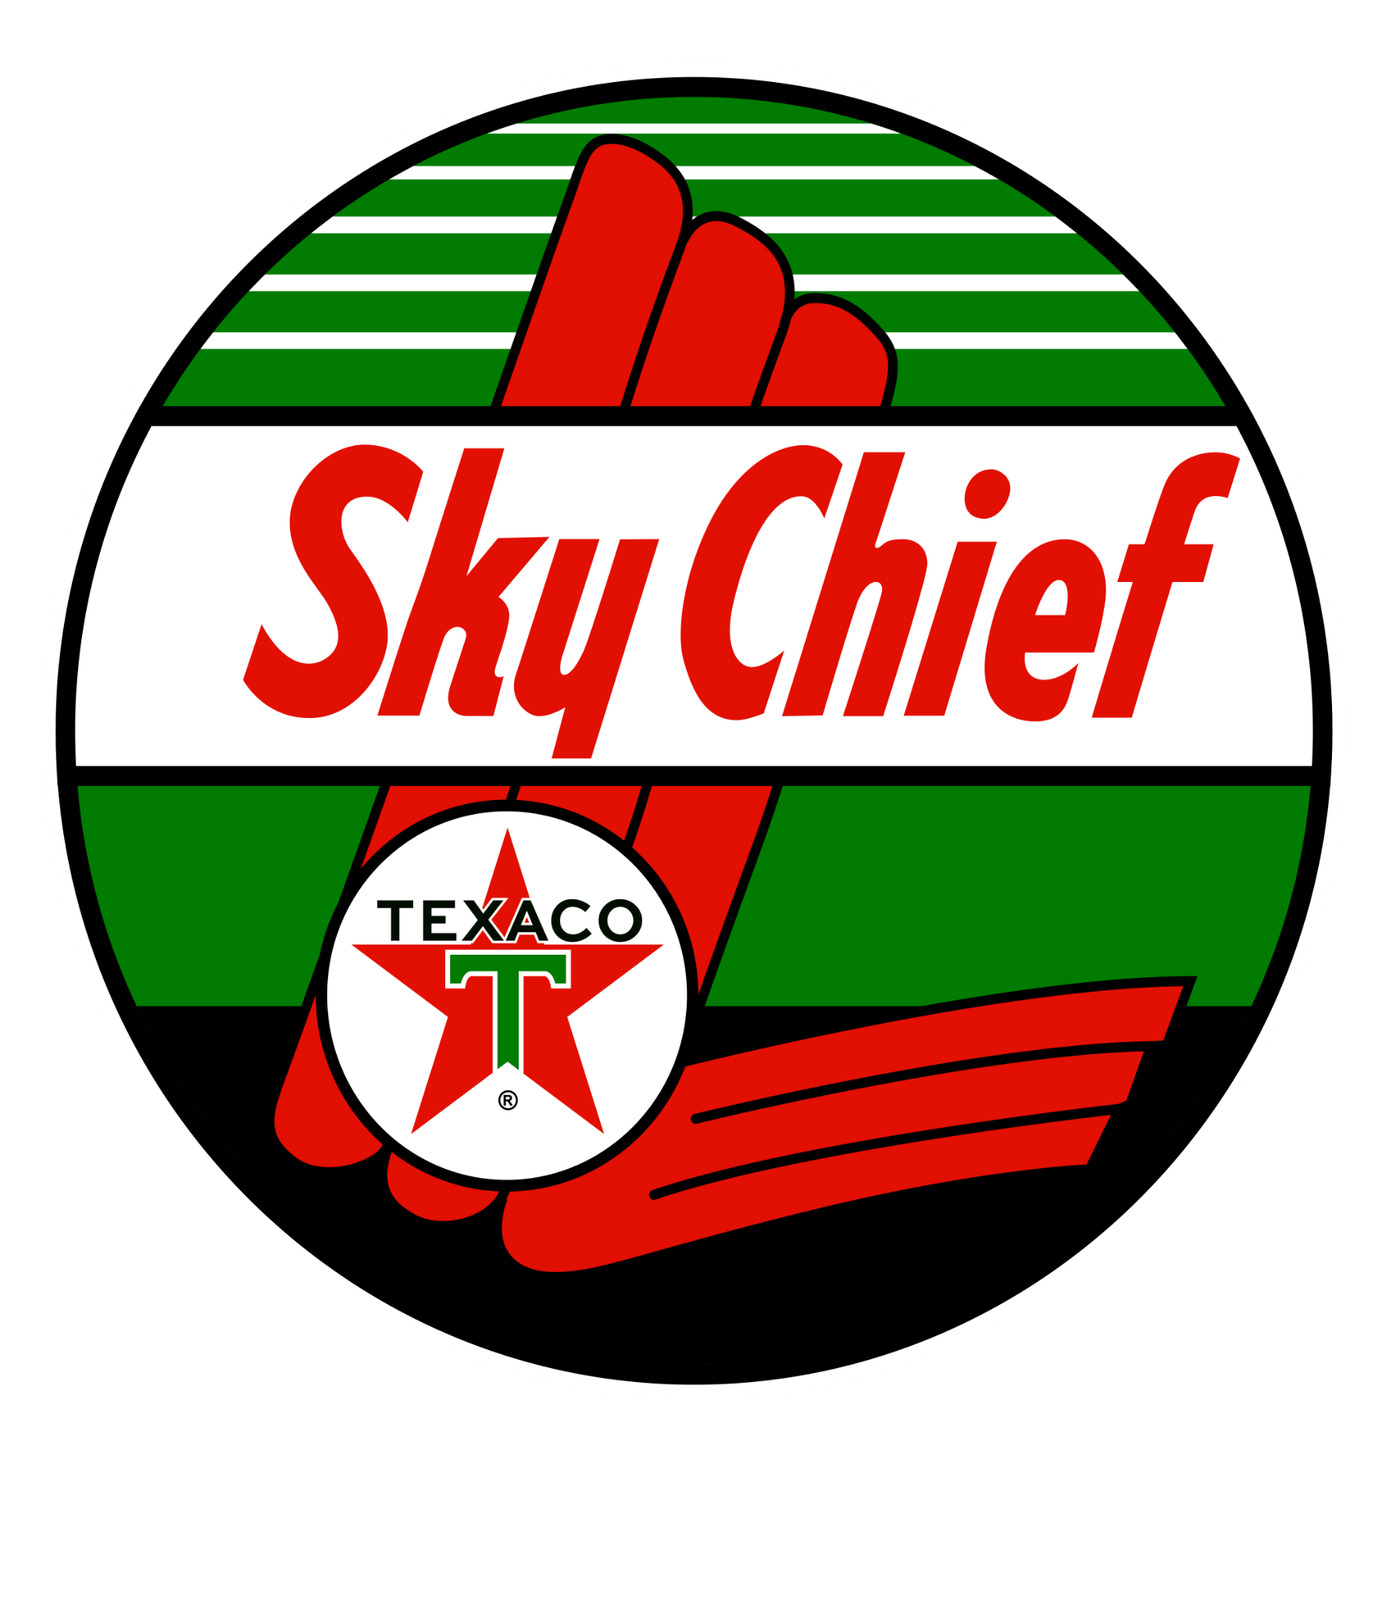 Texaco Sky chief Gas Oil  vintage sticker Vinyl Decal |10 Sizes with TRACKING